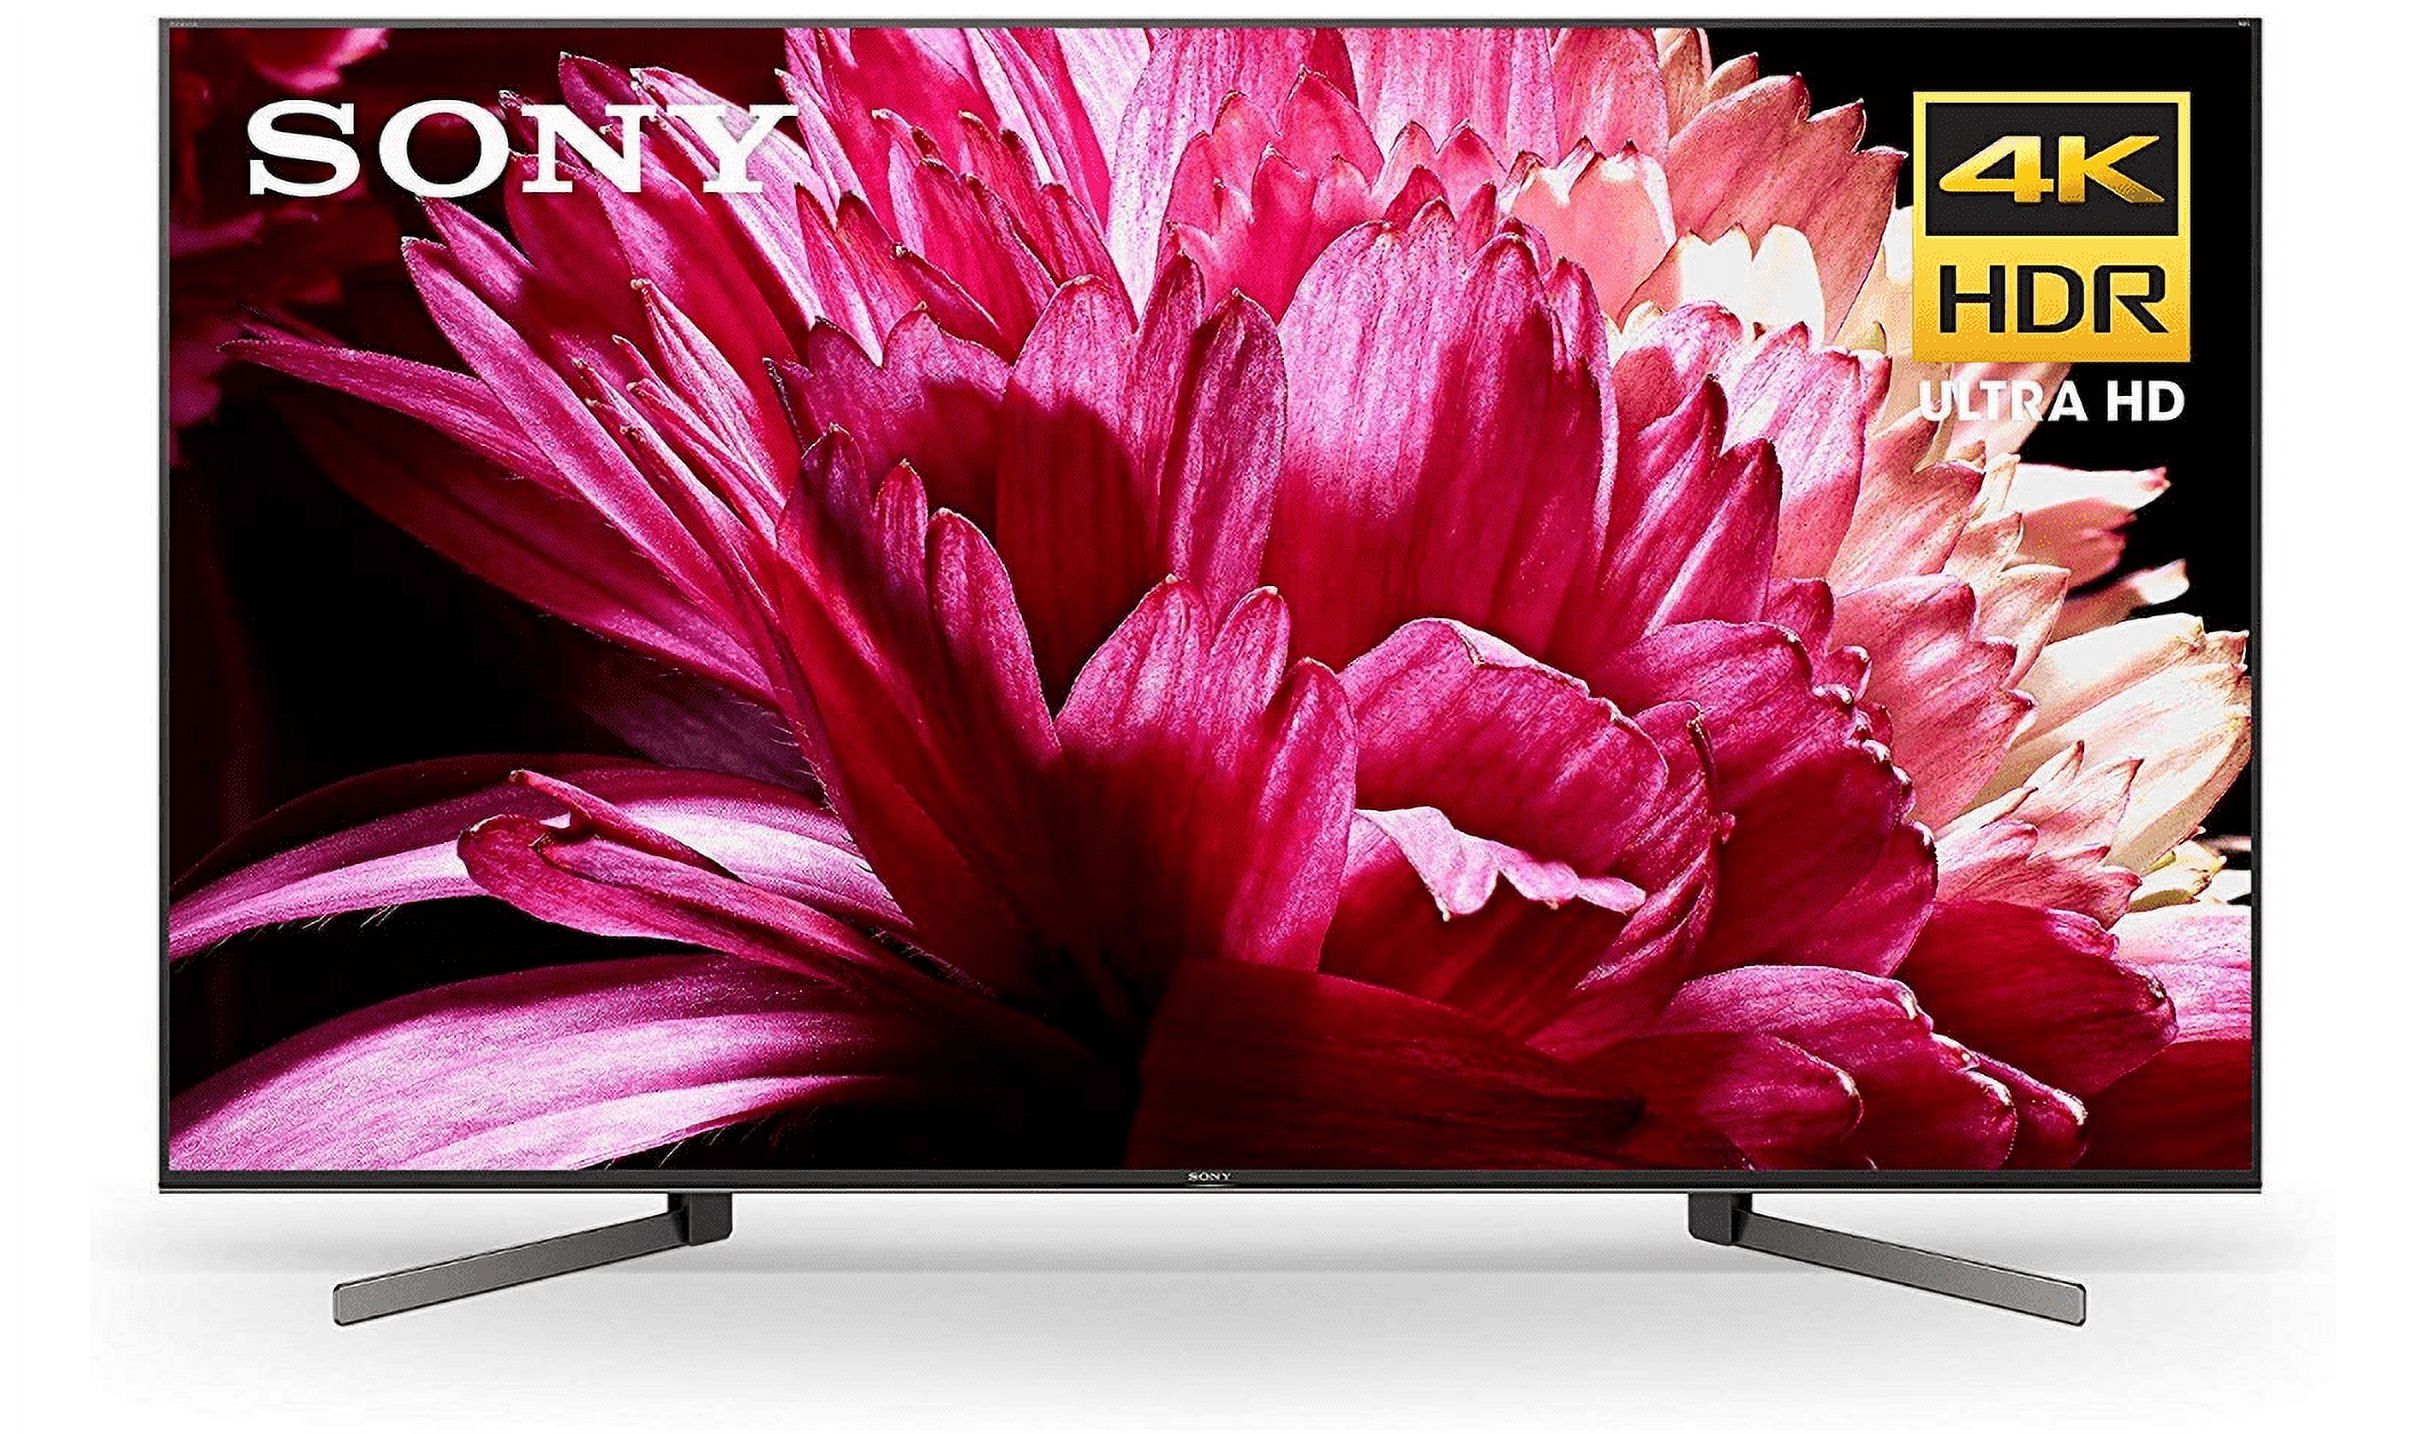 Sony 65" Class 4K UHD LED Android Smart TV HDR BRAVIA 950G Series XBR65X950G - image 1 of 10